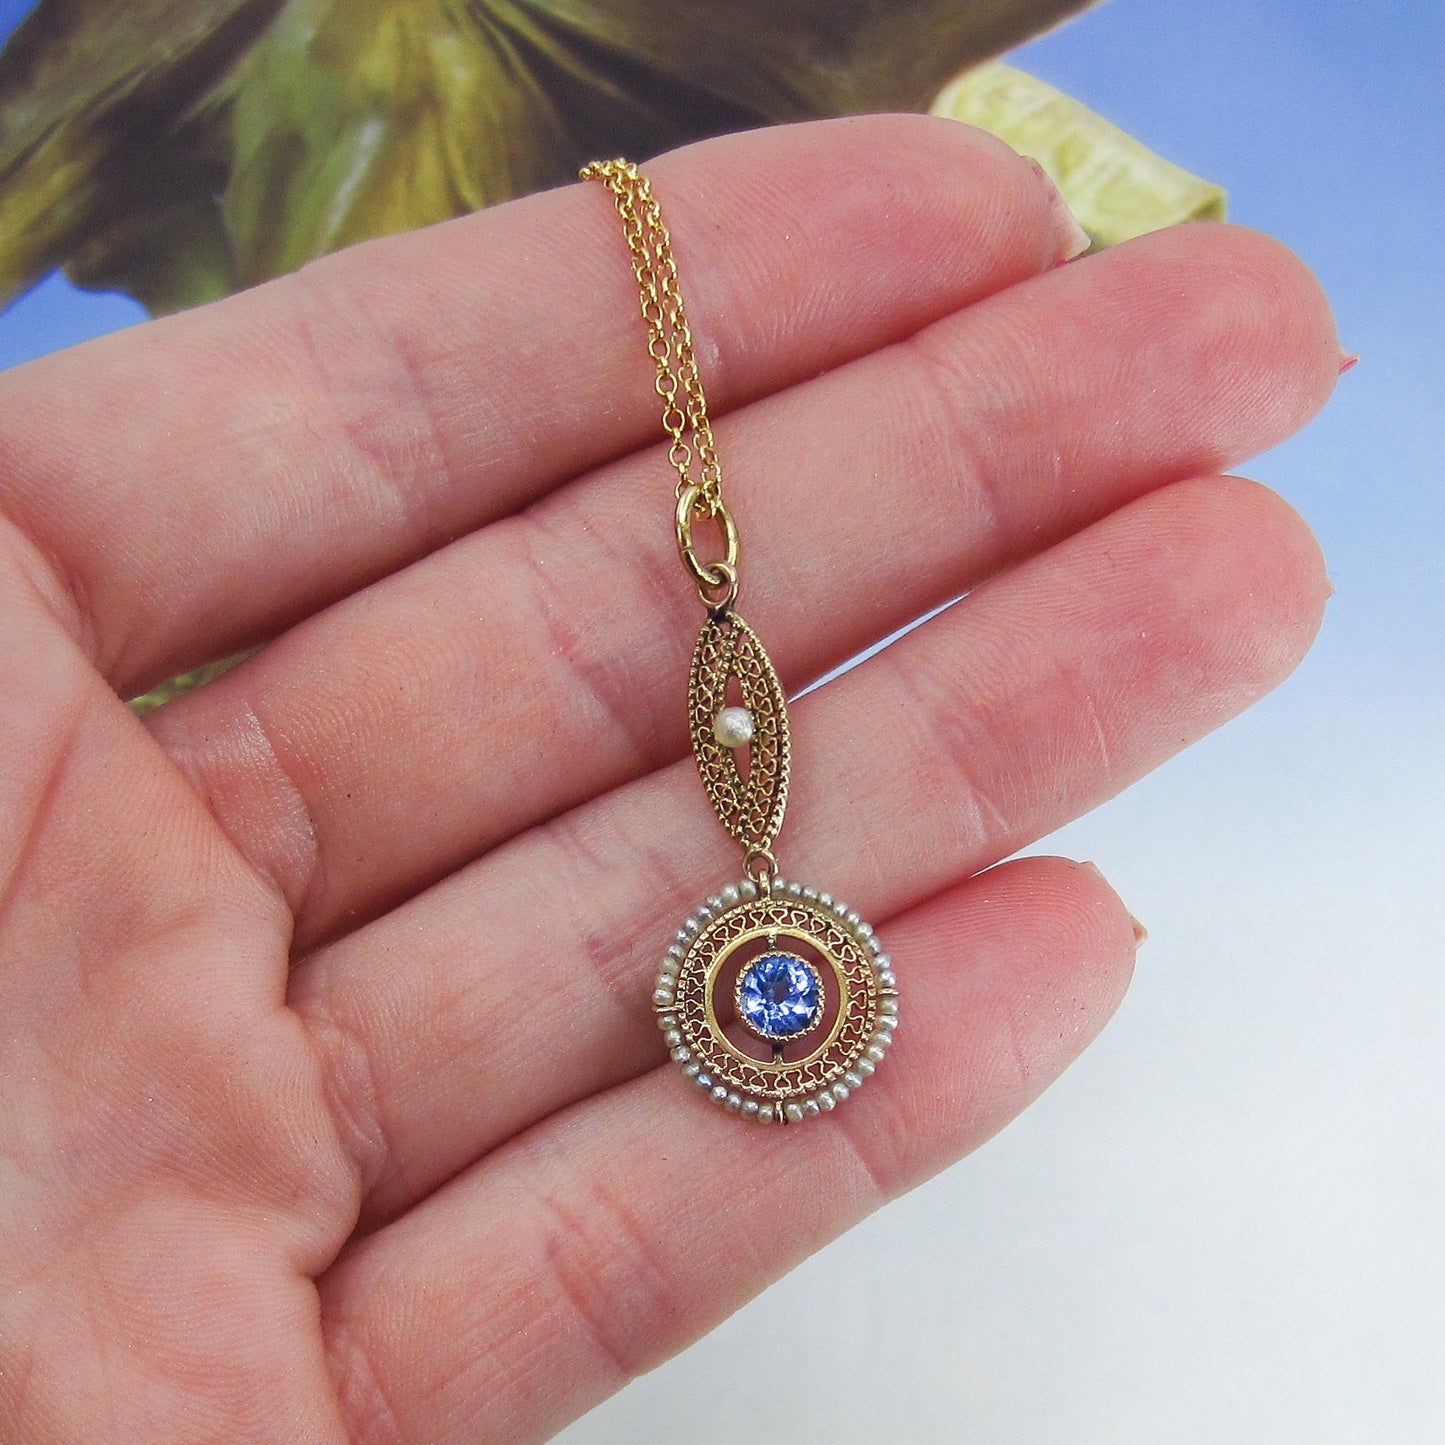 SOLD-Edwardian Seed Pearl and Blue Glass Pendant 10k c. 1910